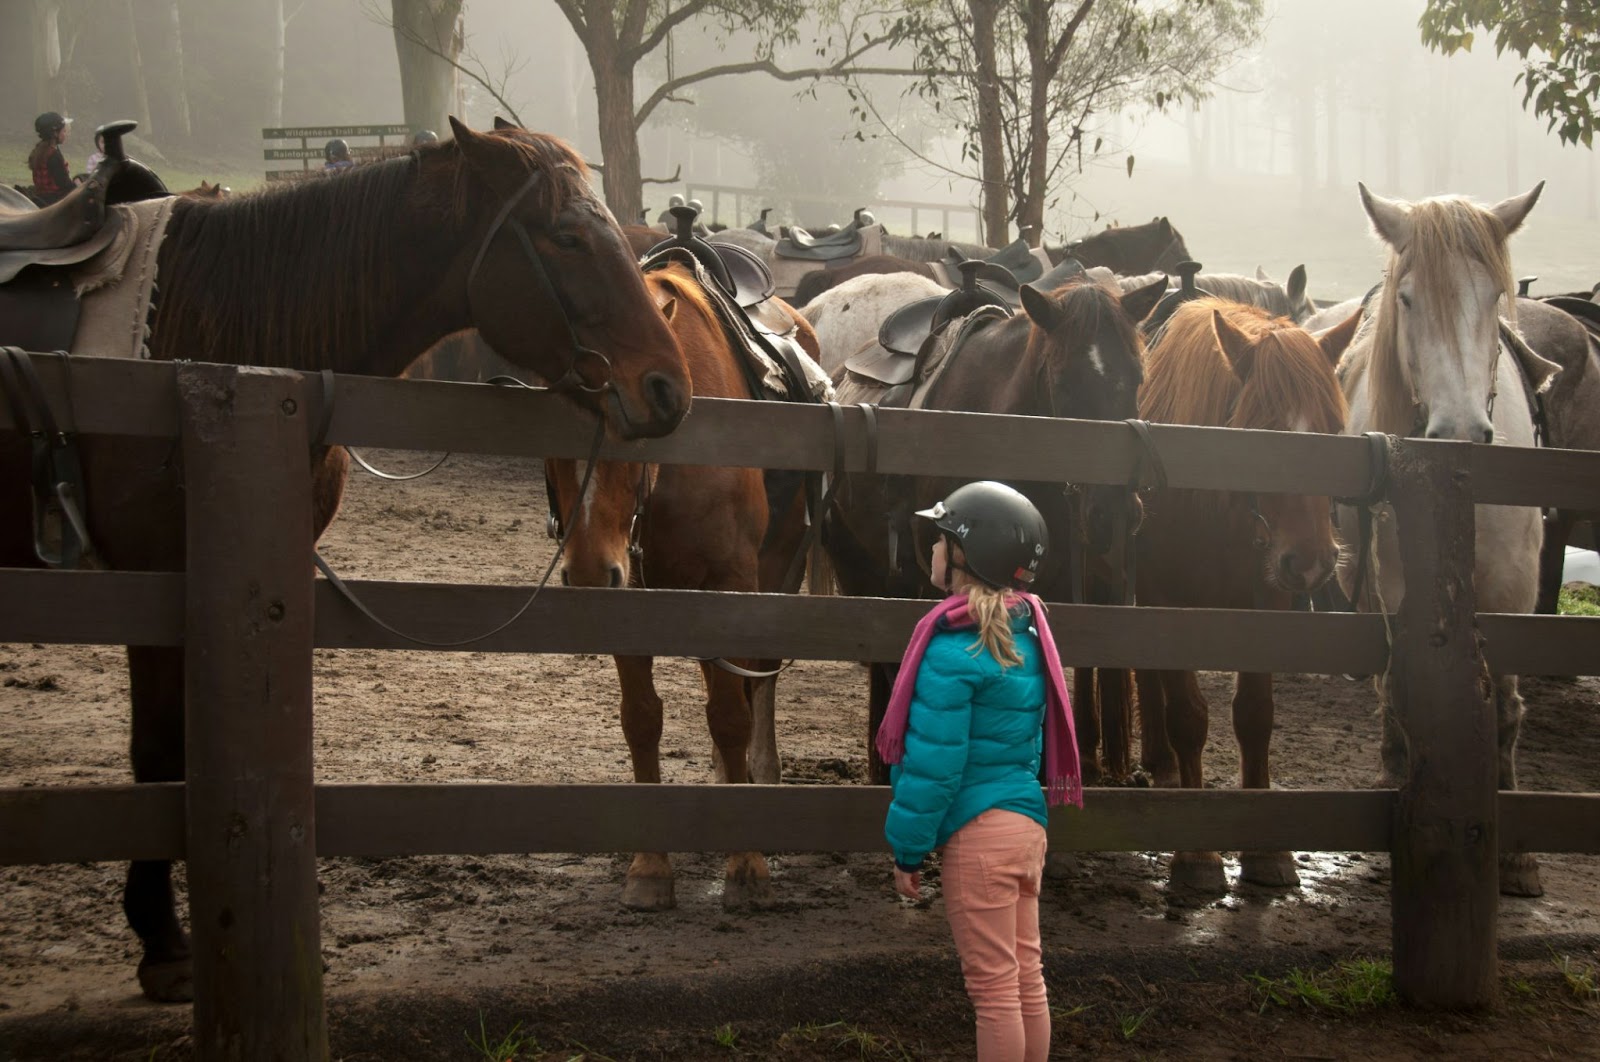 A child ready to go horseback riding standing at a fence looking at a horse with more horses in the background.